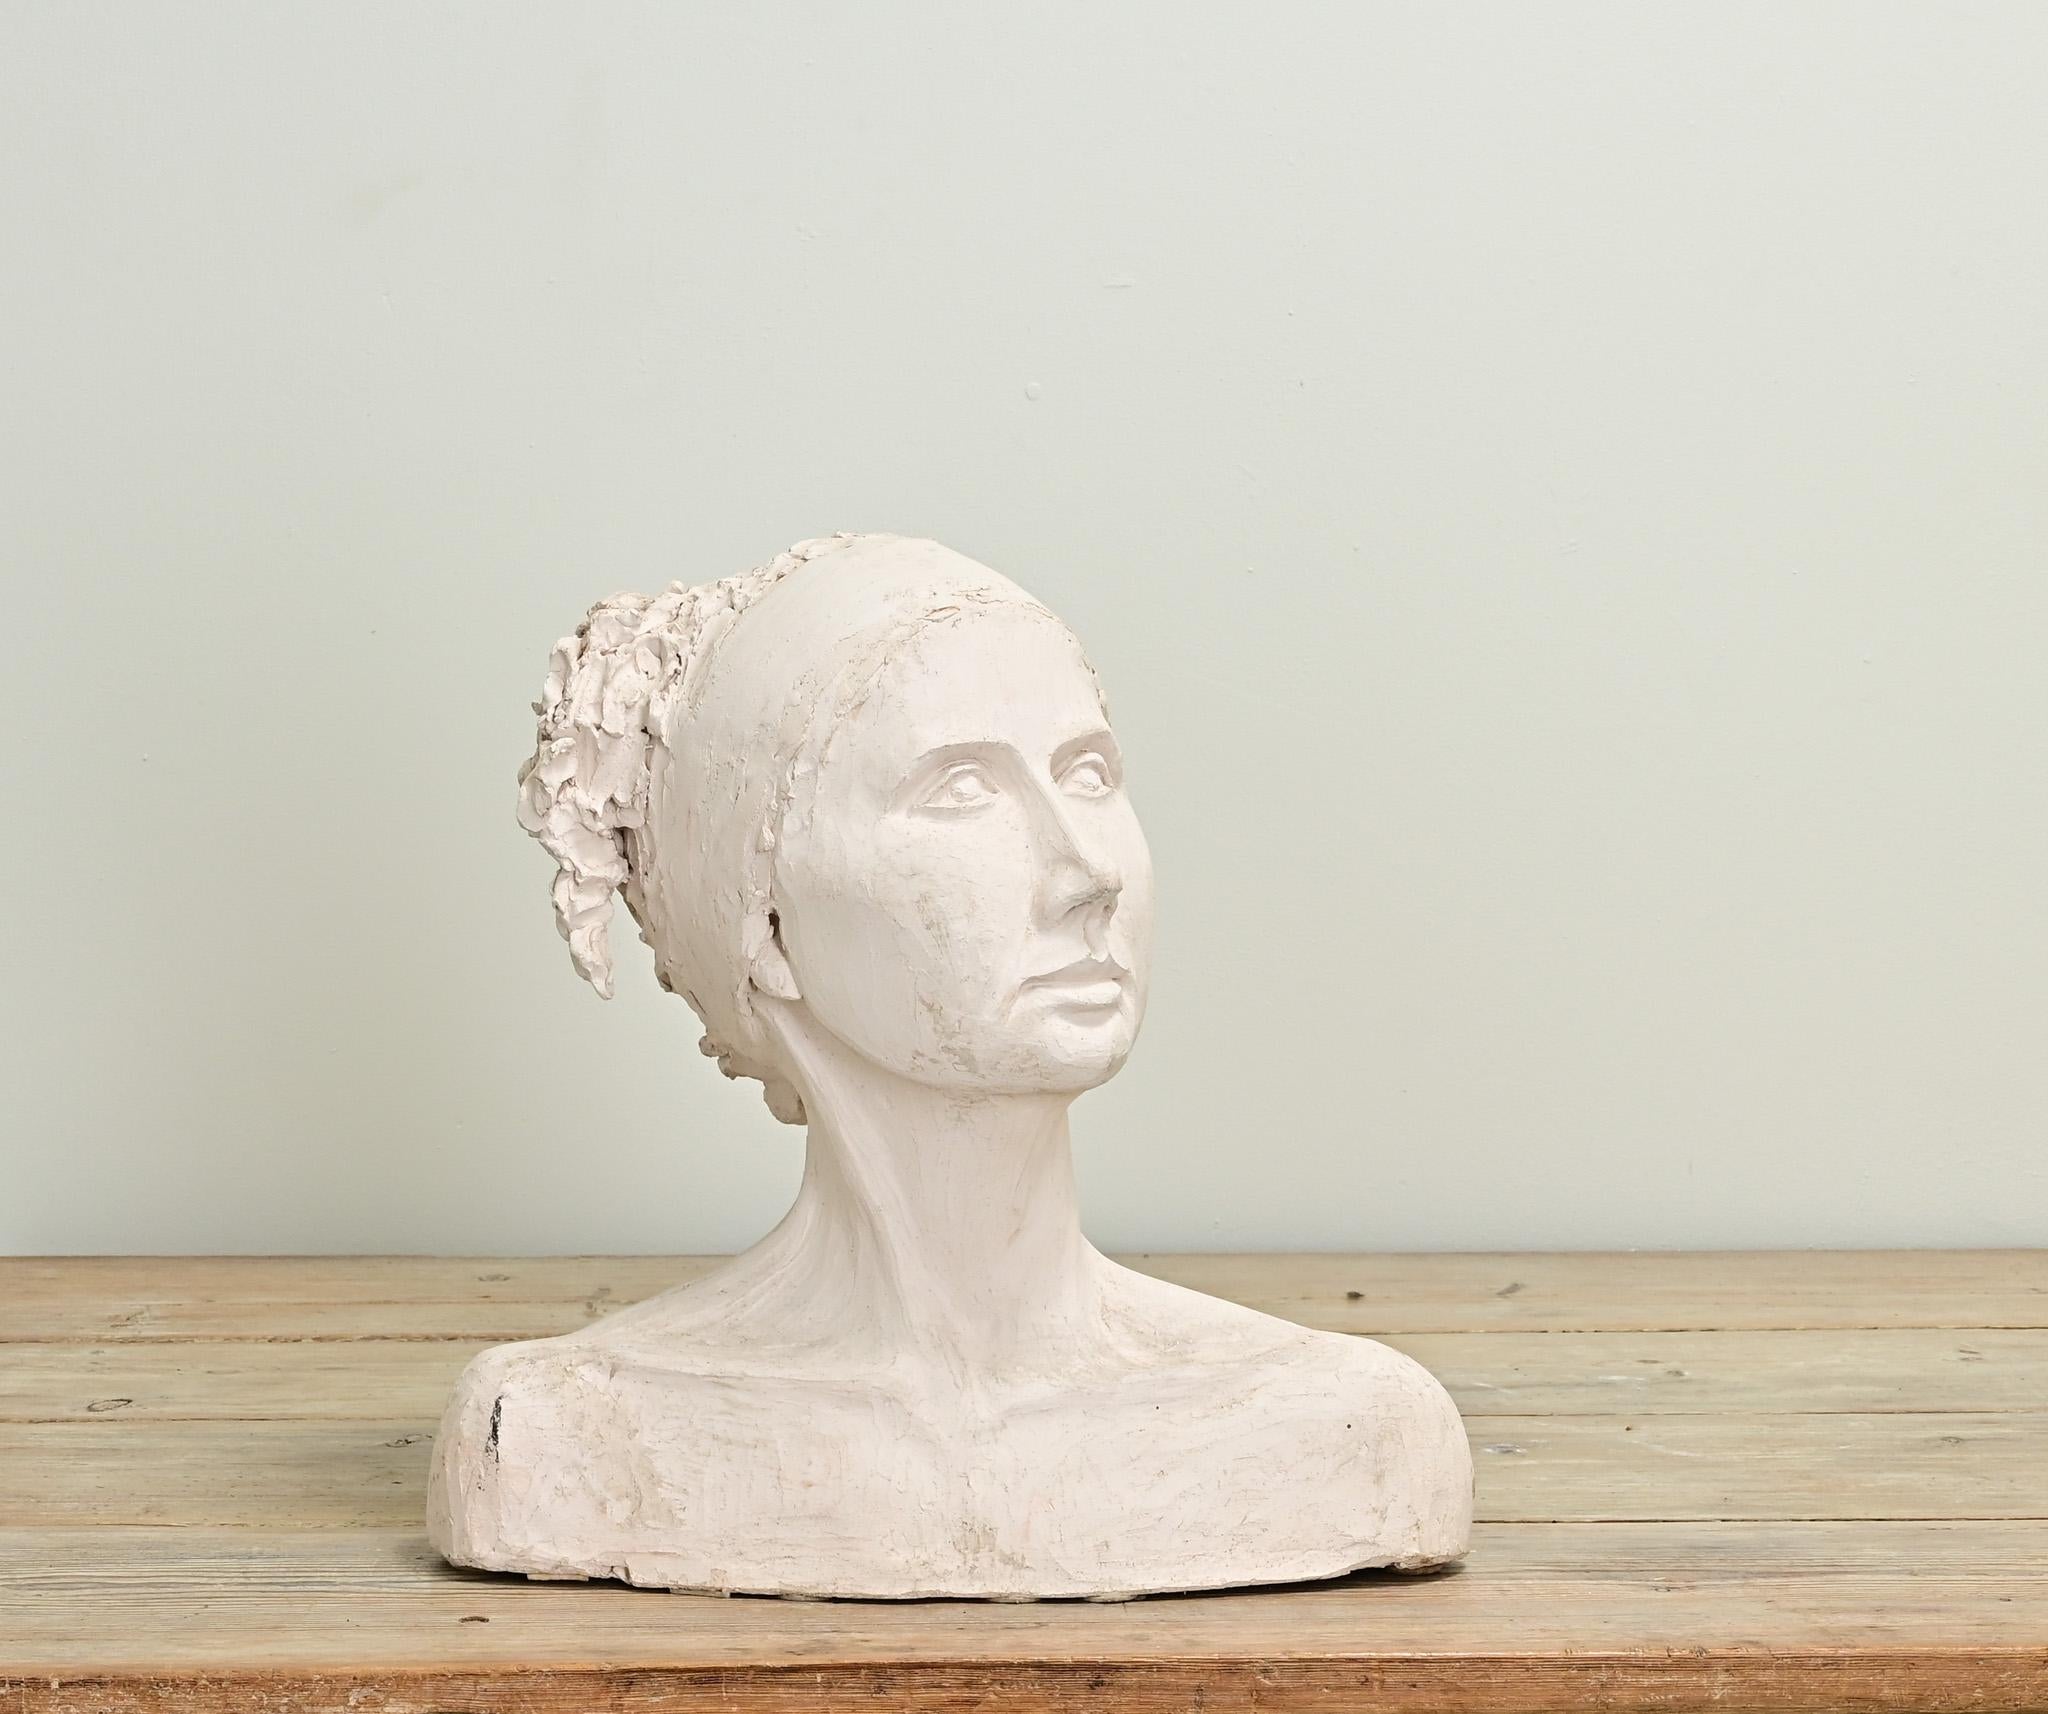 A life-like scale and replica of a lady. Impressive craftsmanship and details can be found on this bust made of plaster. Be sure to view all the details from every angle.